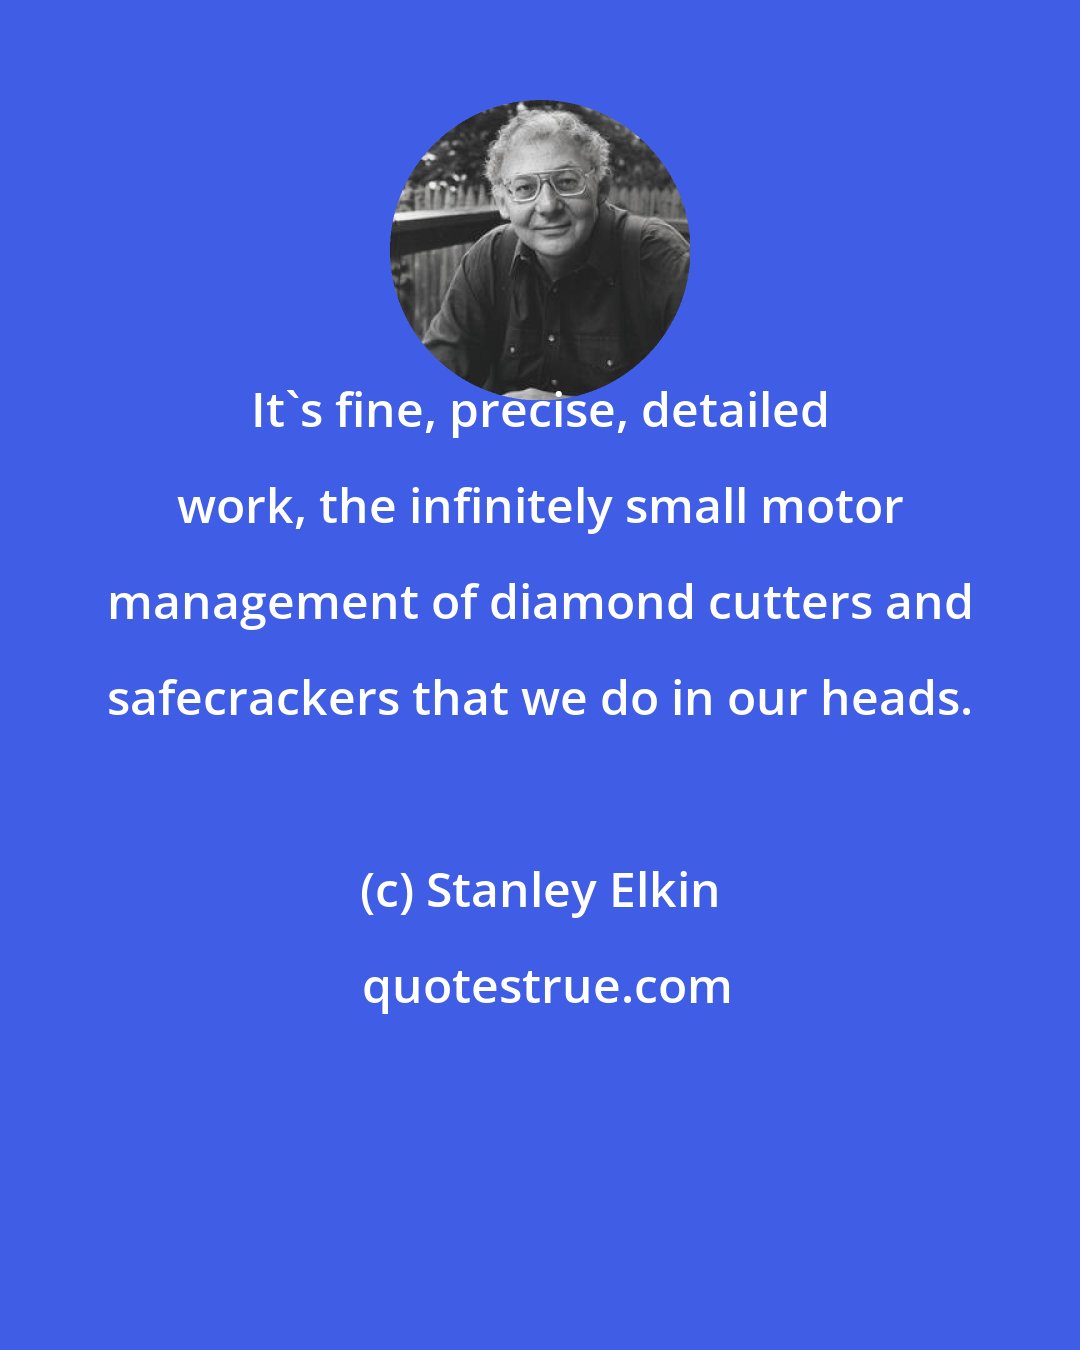 Stanley Elkin: It's fine, precise, detailed work, the infinitely small motor management of diamond cutters and safecrackers that we do in our heads.